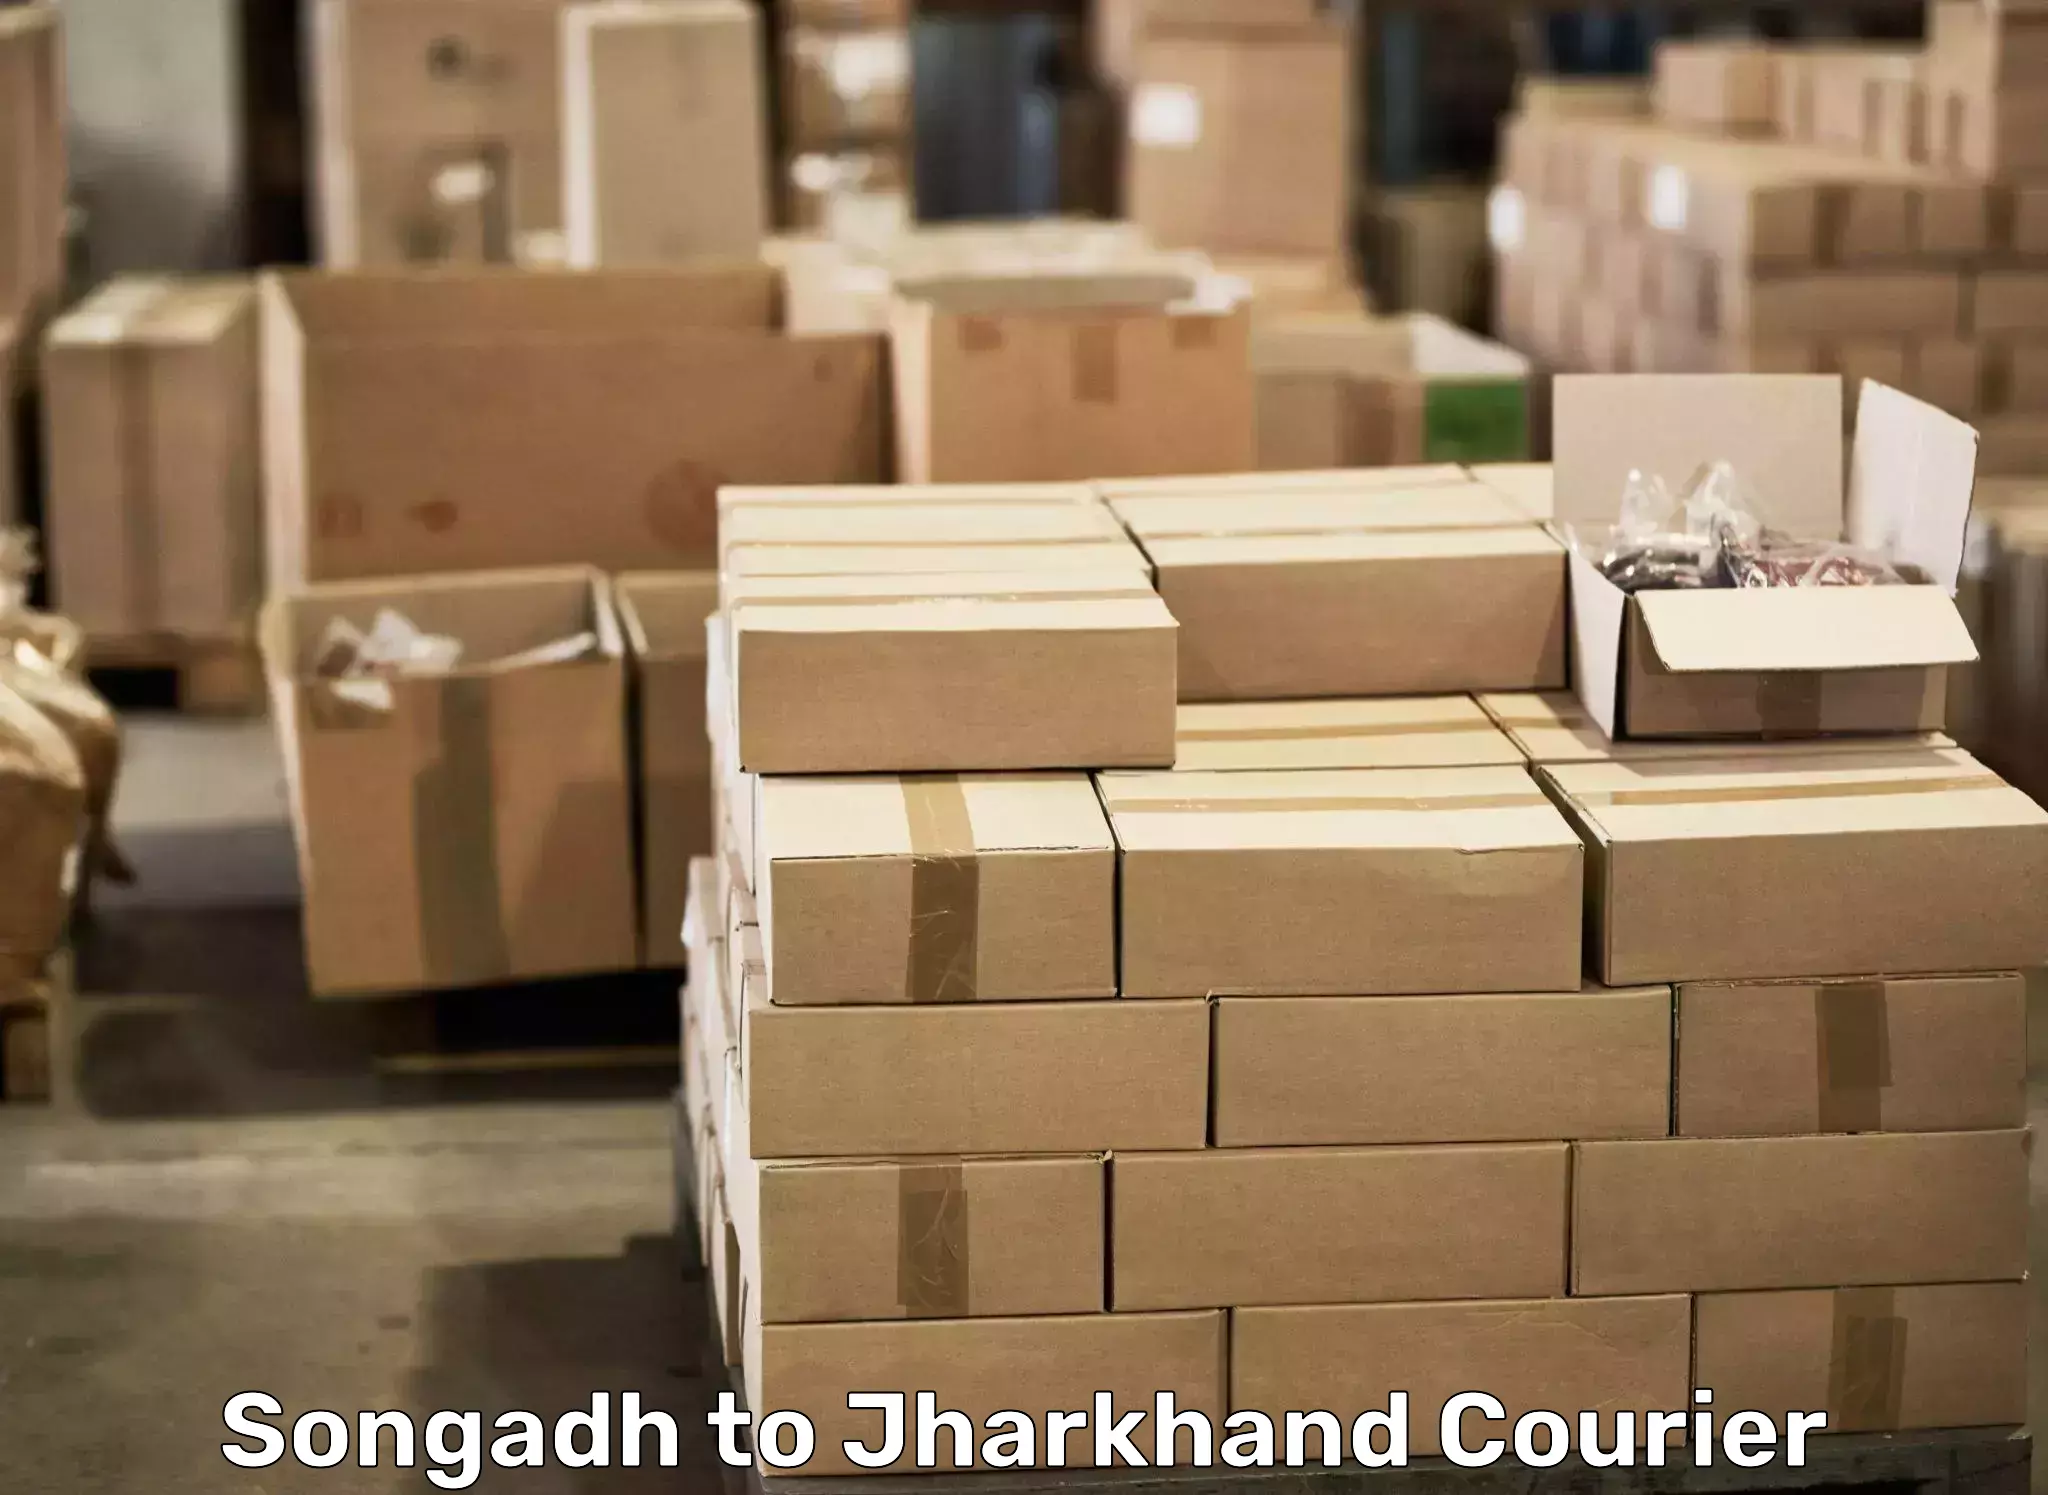 Professional packing services Songadh to Jamshedpur